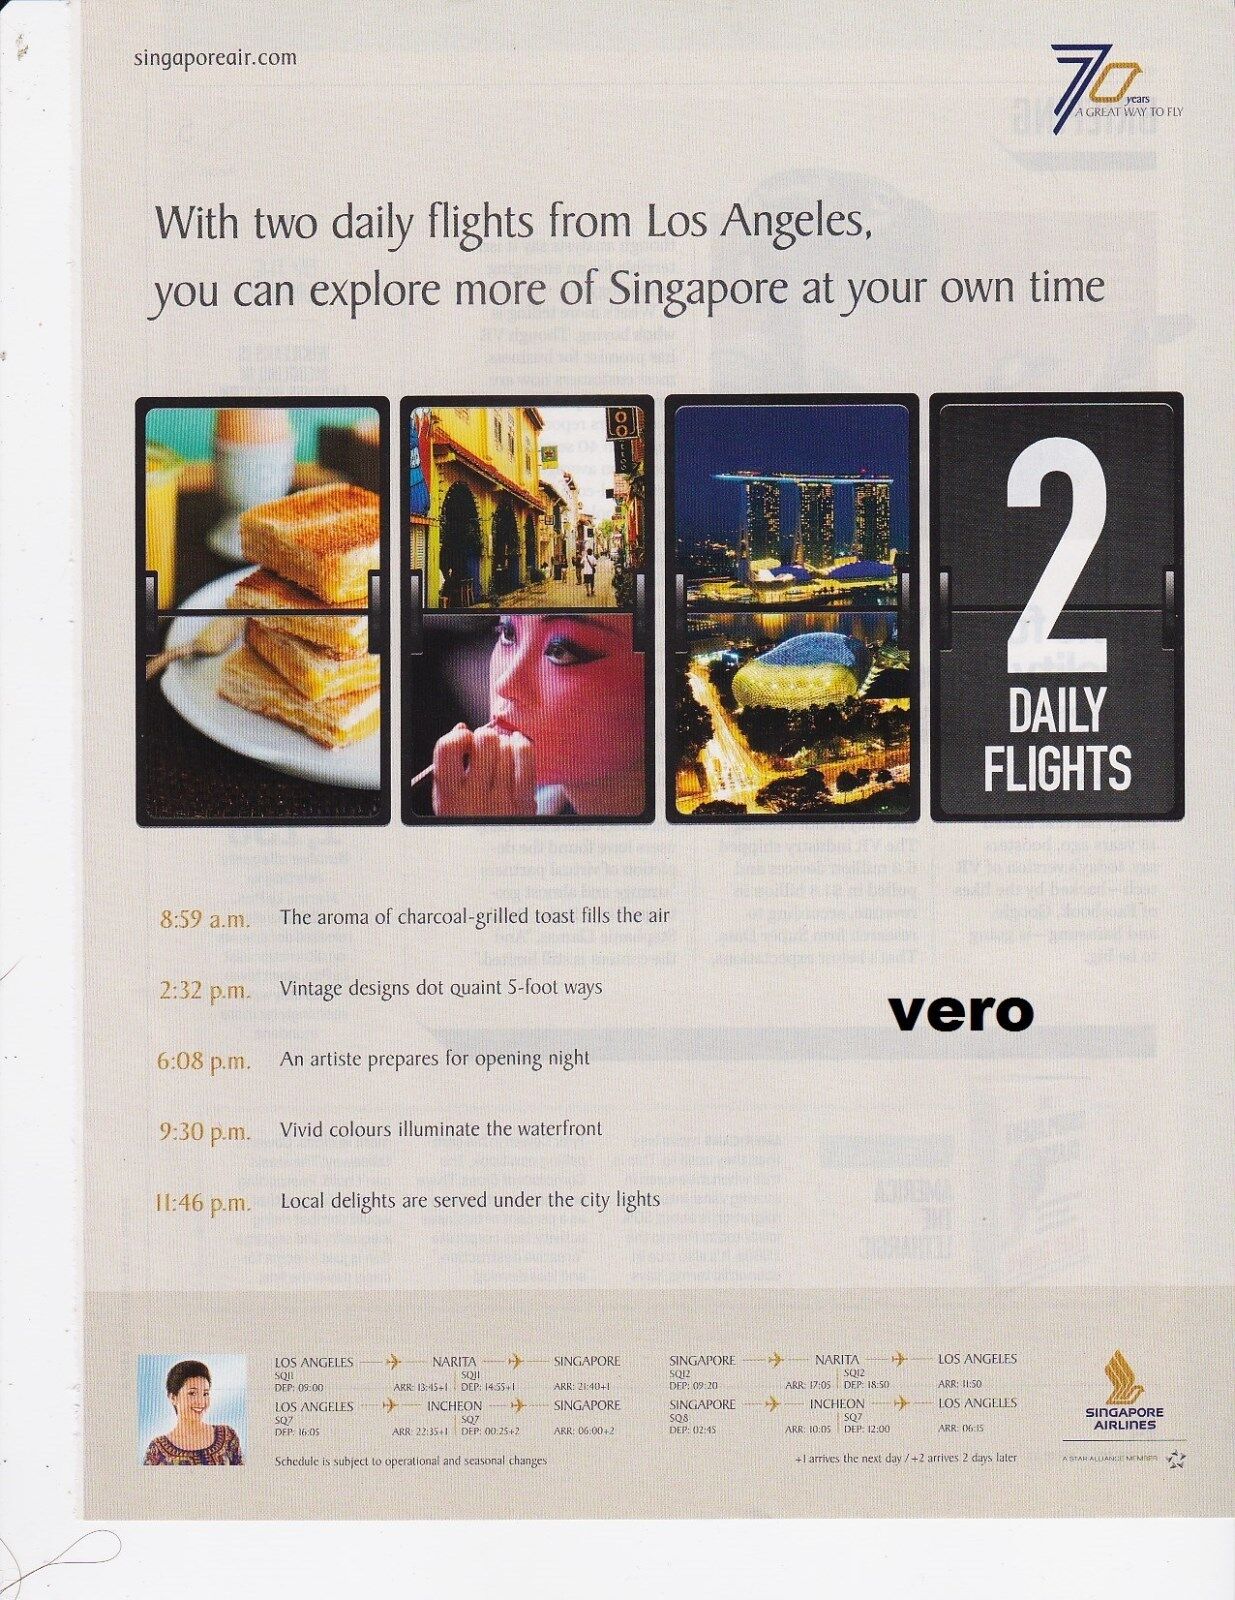 SINGAPORE airline 2017 magazine ad clipping print page - 2 DAILY FLIGHTS LA